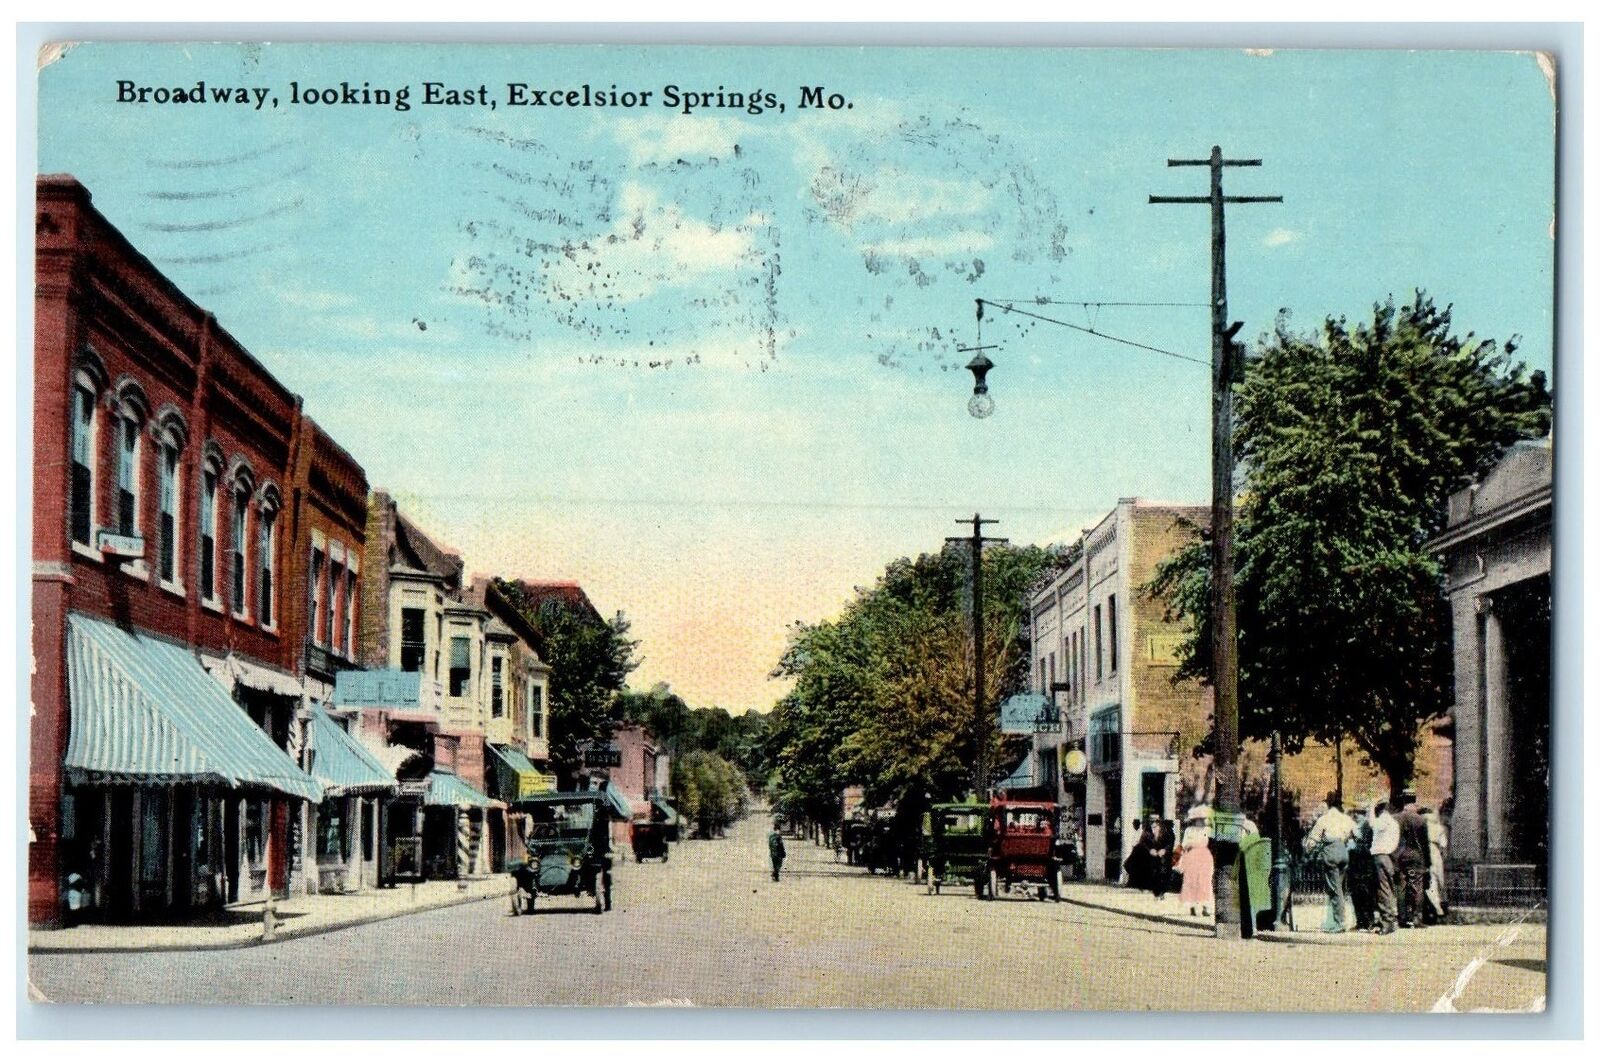 1912 Broadway Looking East Classic Cars Excelsior Springs Missouri MO Postcard